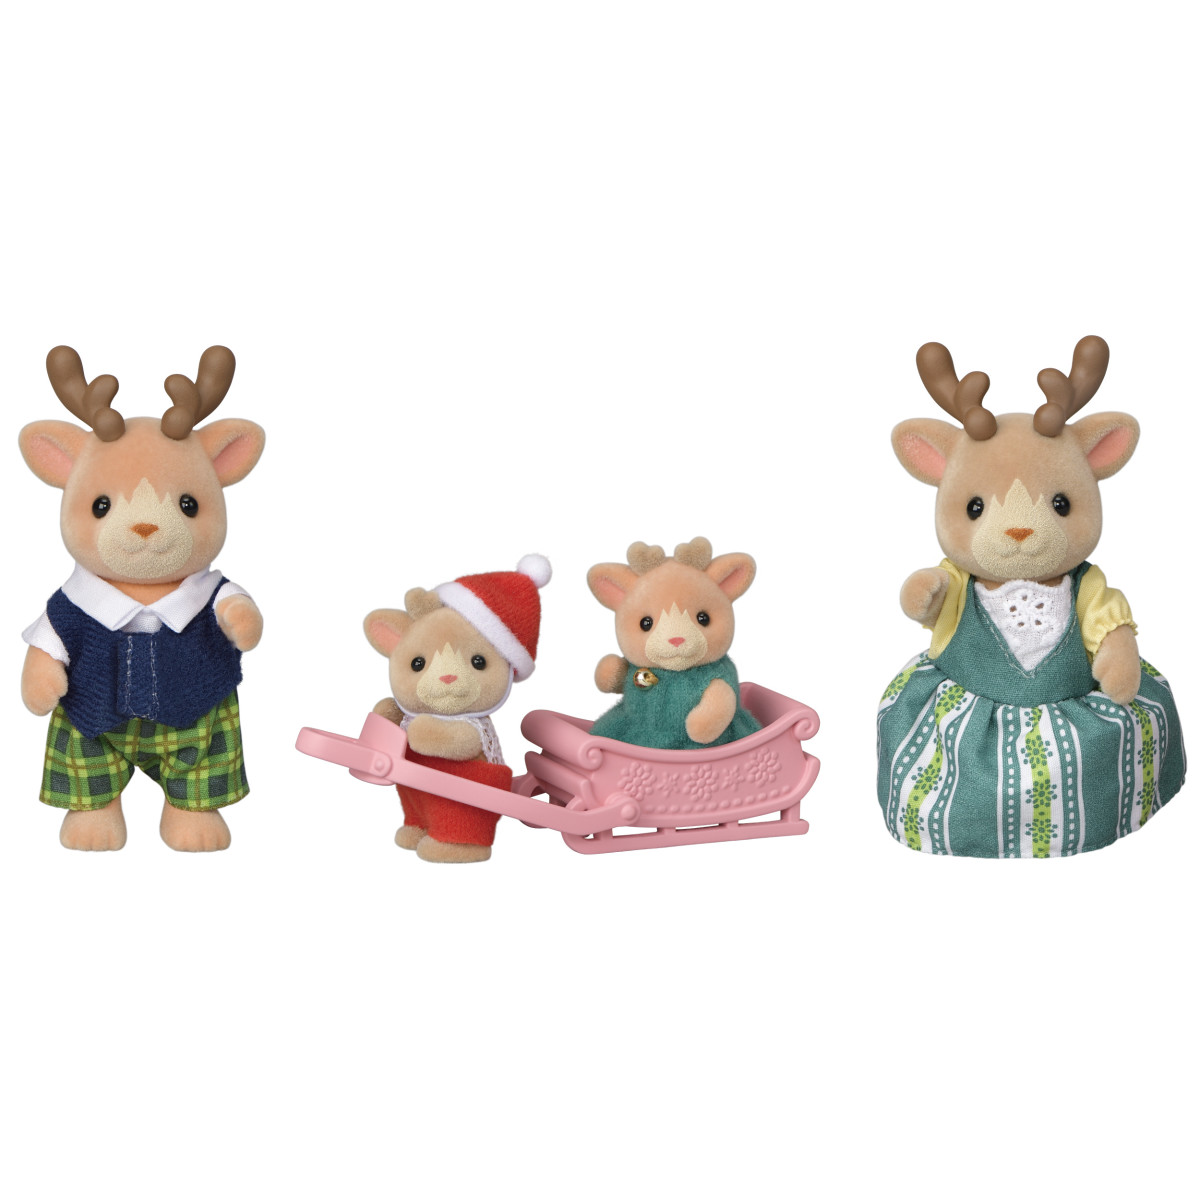 Reindeer Family, , large image 0